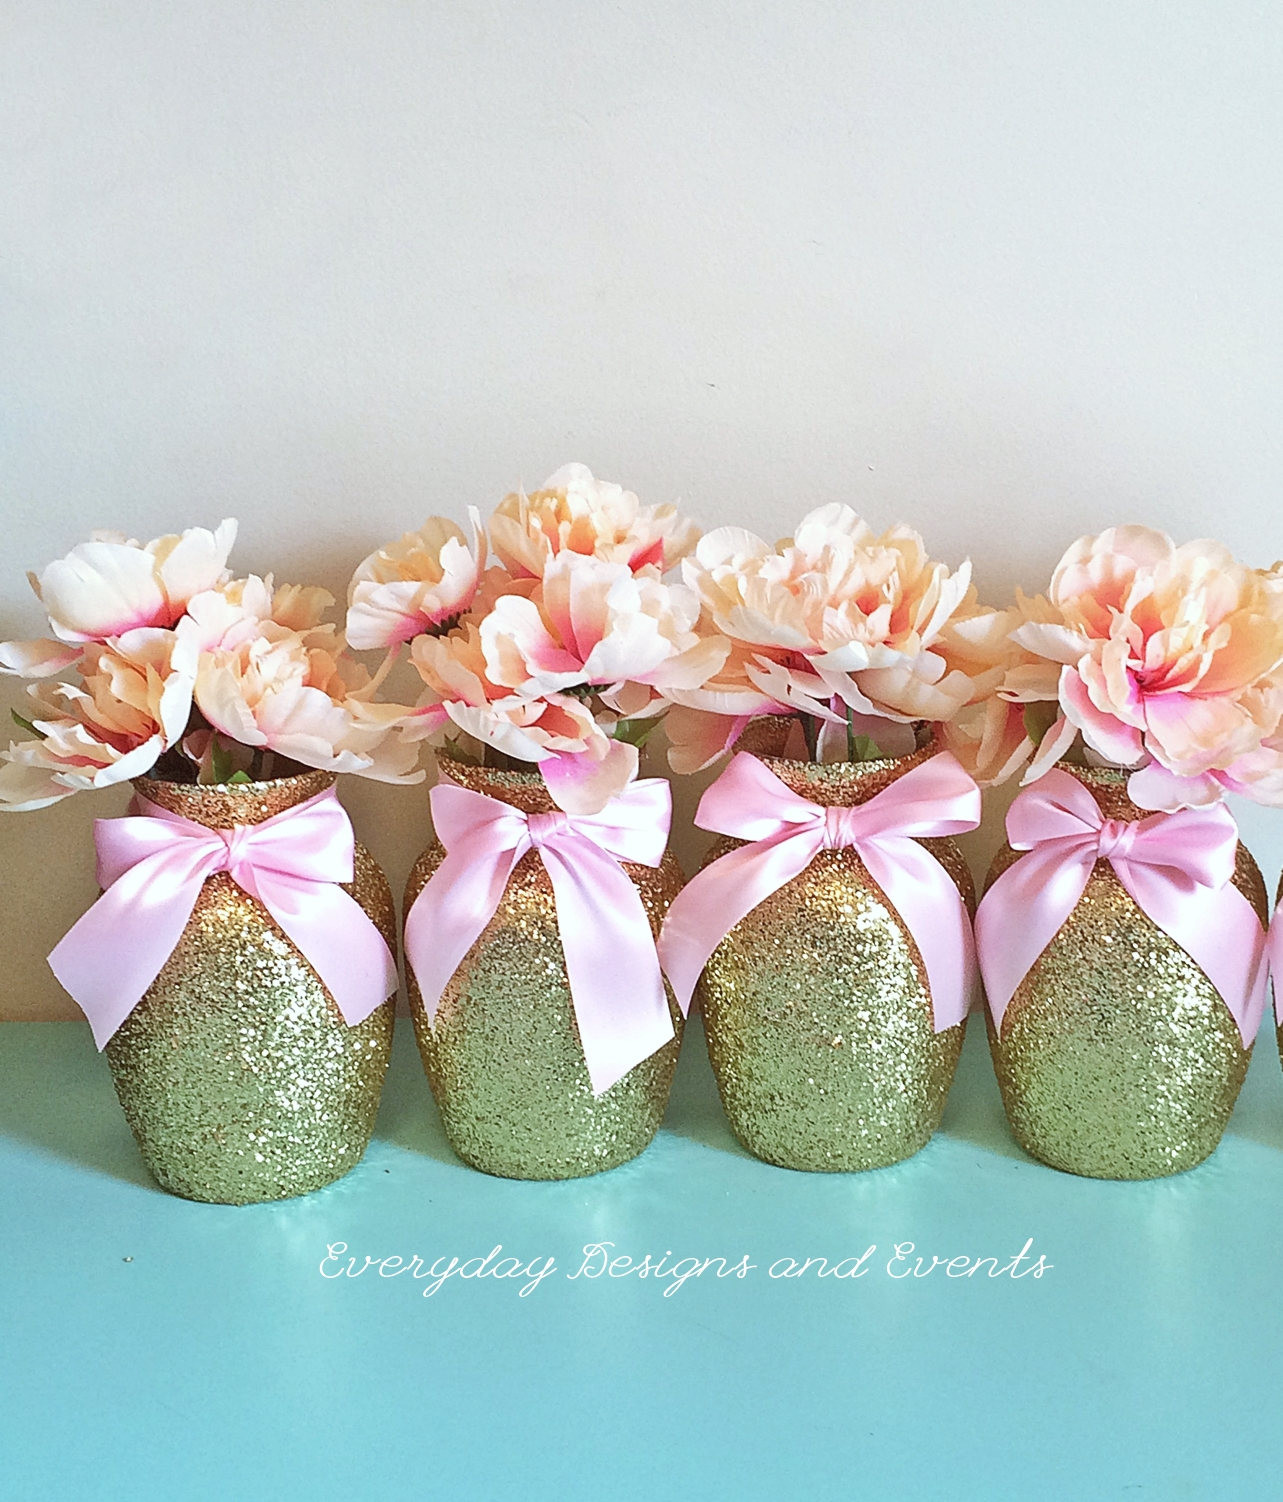 Pink And Gold Baby Shower Decoration Ideas
 4 Gold & Pink Vases Baby shower Decorations Baby shower